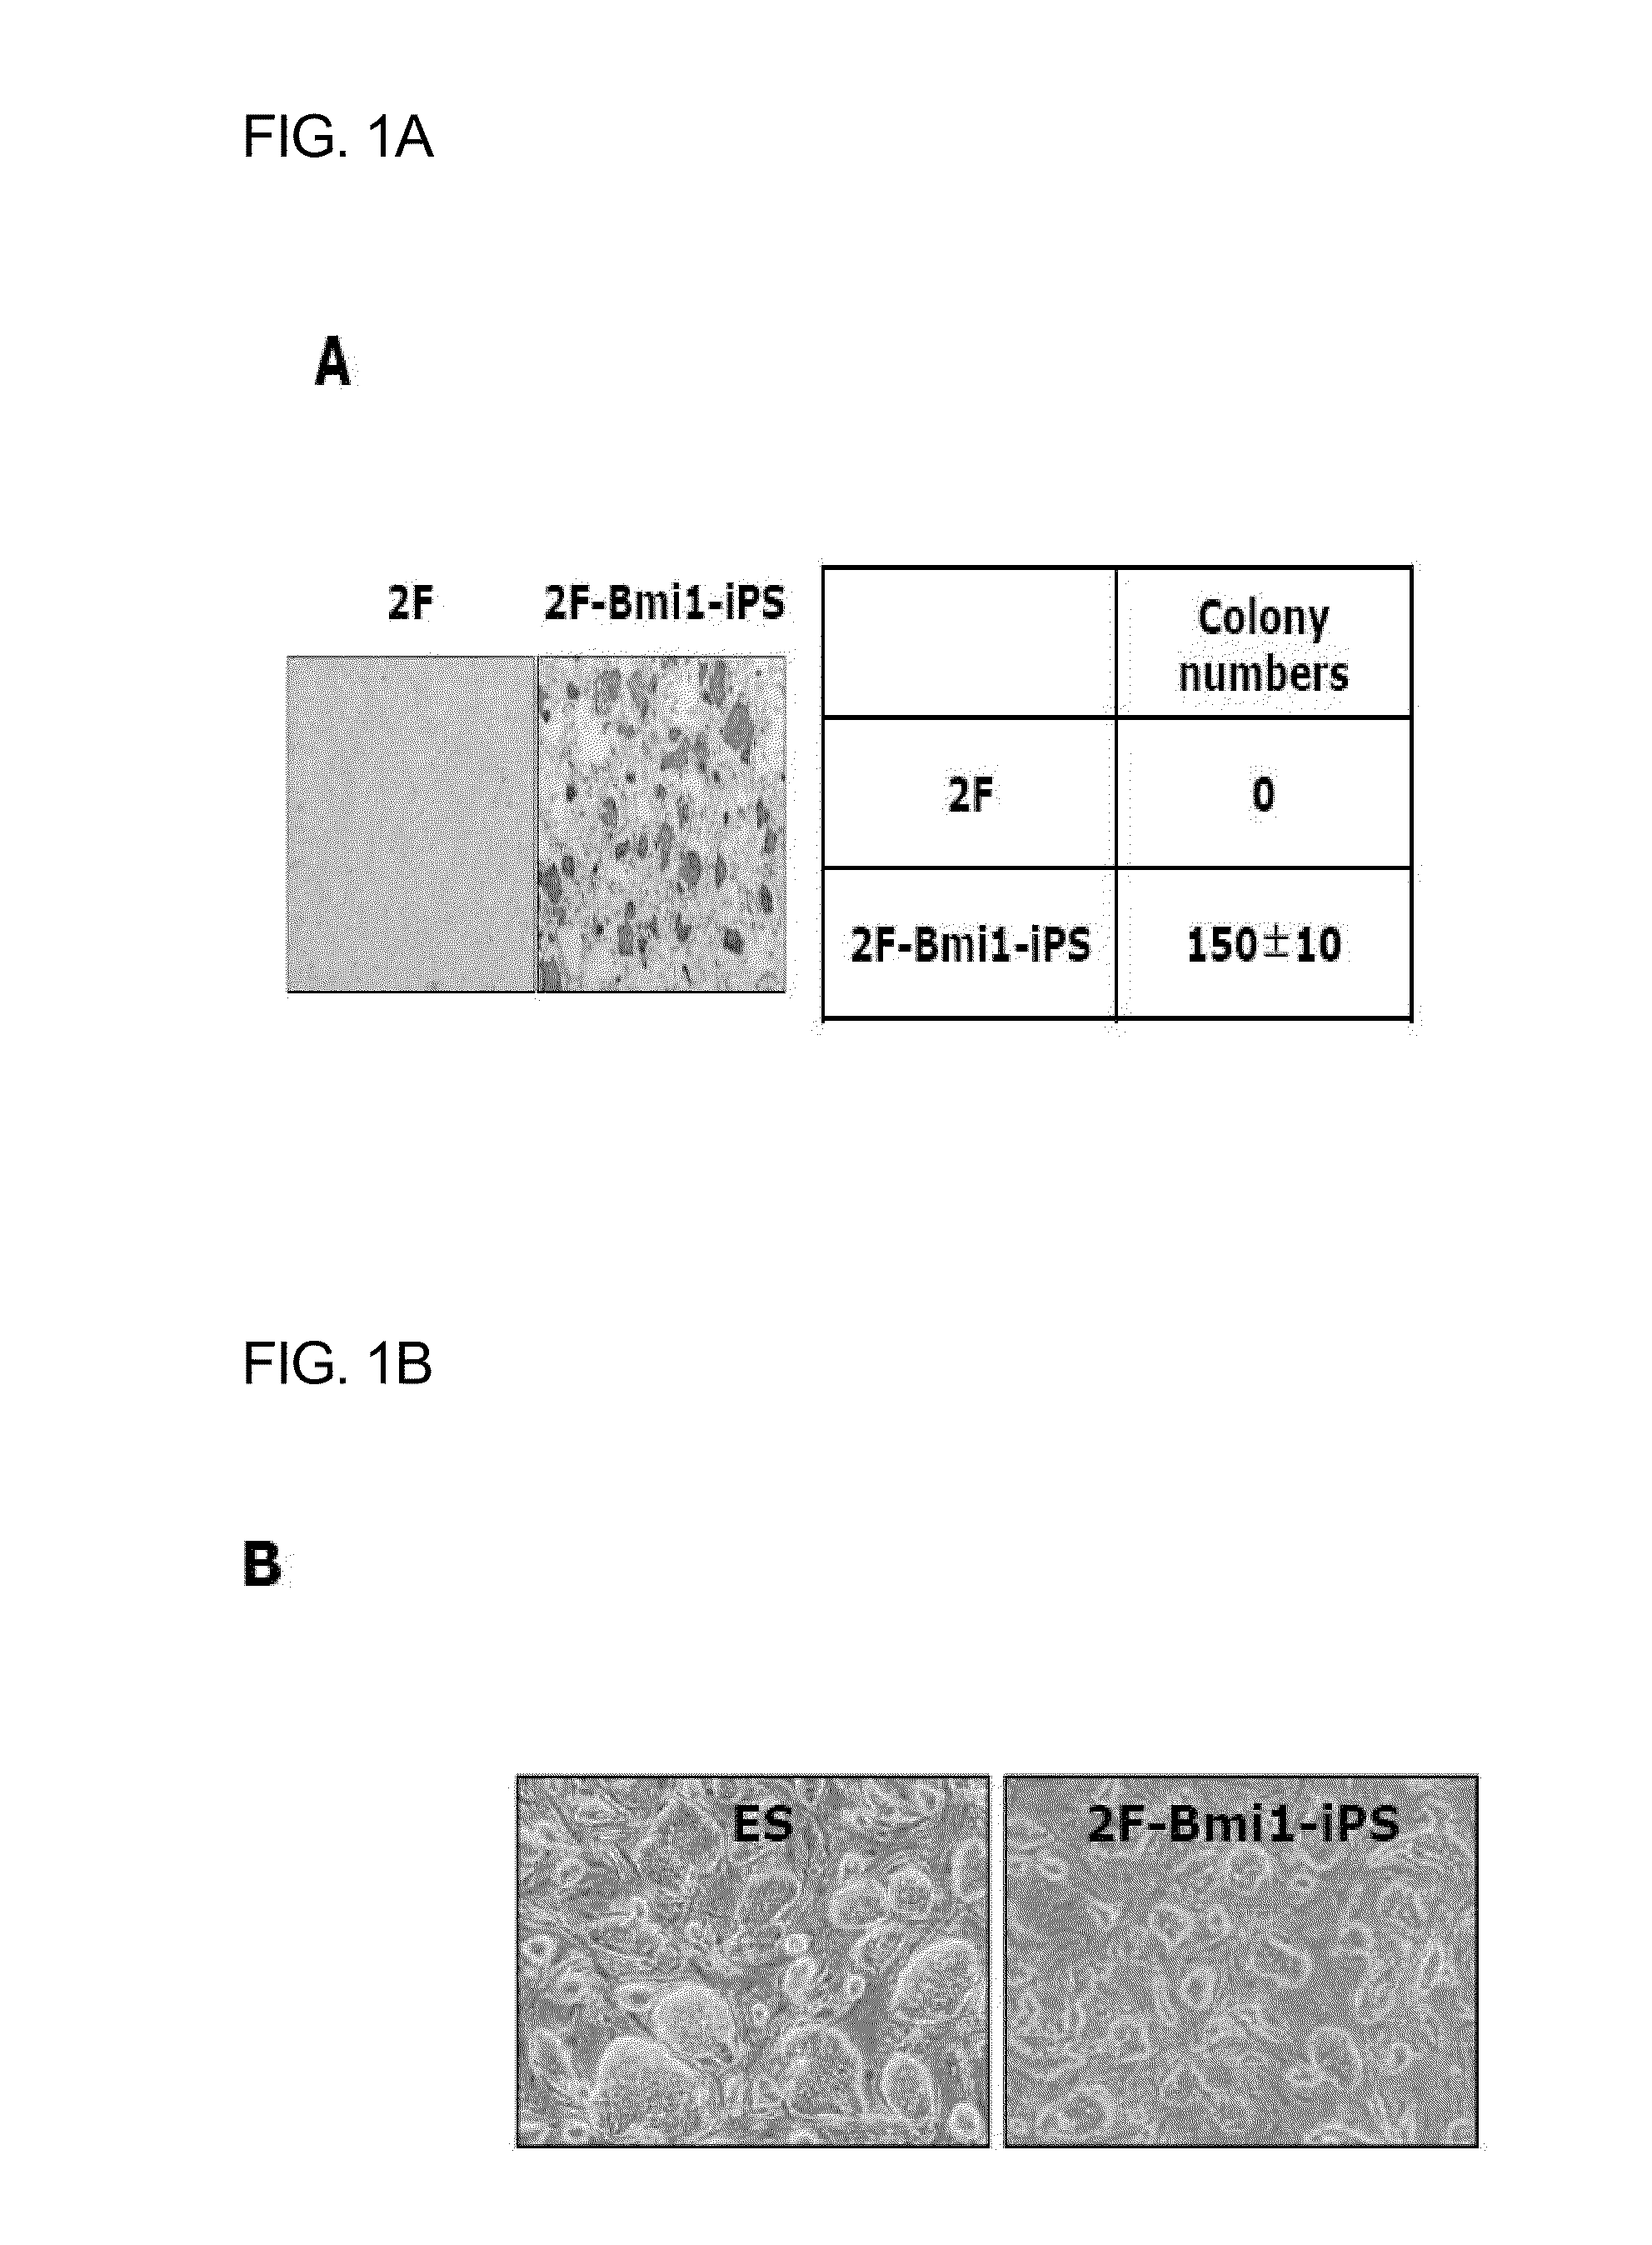 COMPOSITION FOR REPROGRAMMING SOMATIC CELLS TO GENERATE INDUCED PLURIPOTENT STEM CELLS, COMPRISING Oct4 IN COMBINATION WITH Bmi1 OR ITS UPSTREAM REGULATOR, AND METHOD FOR GENERATING INDUCED PLURIPOTENT STEM CELLS USING THE SAME